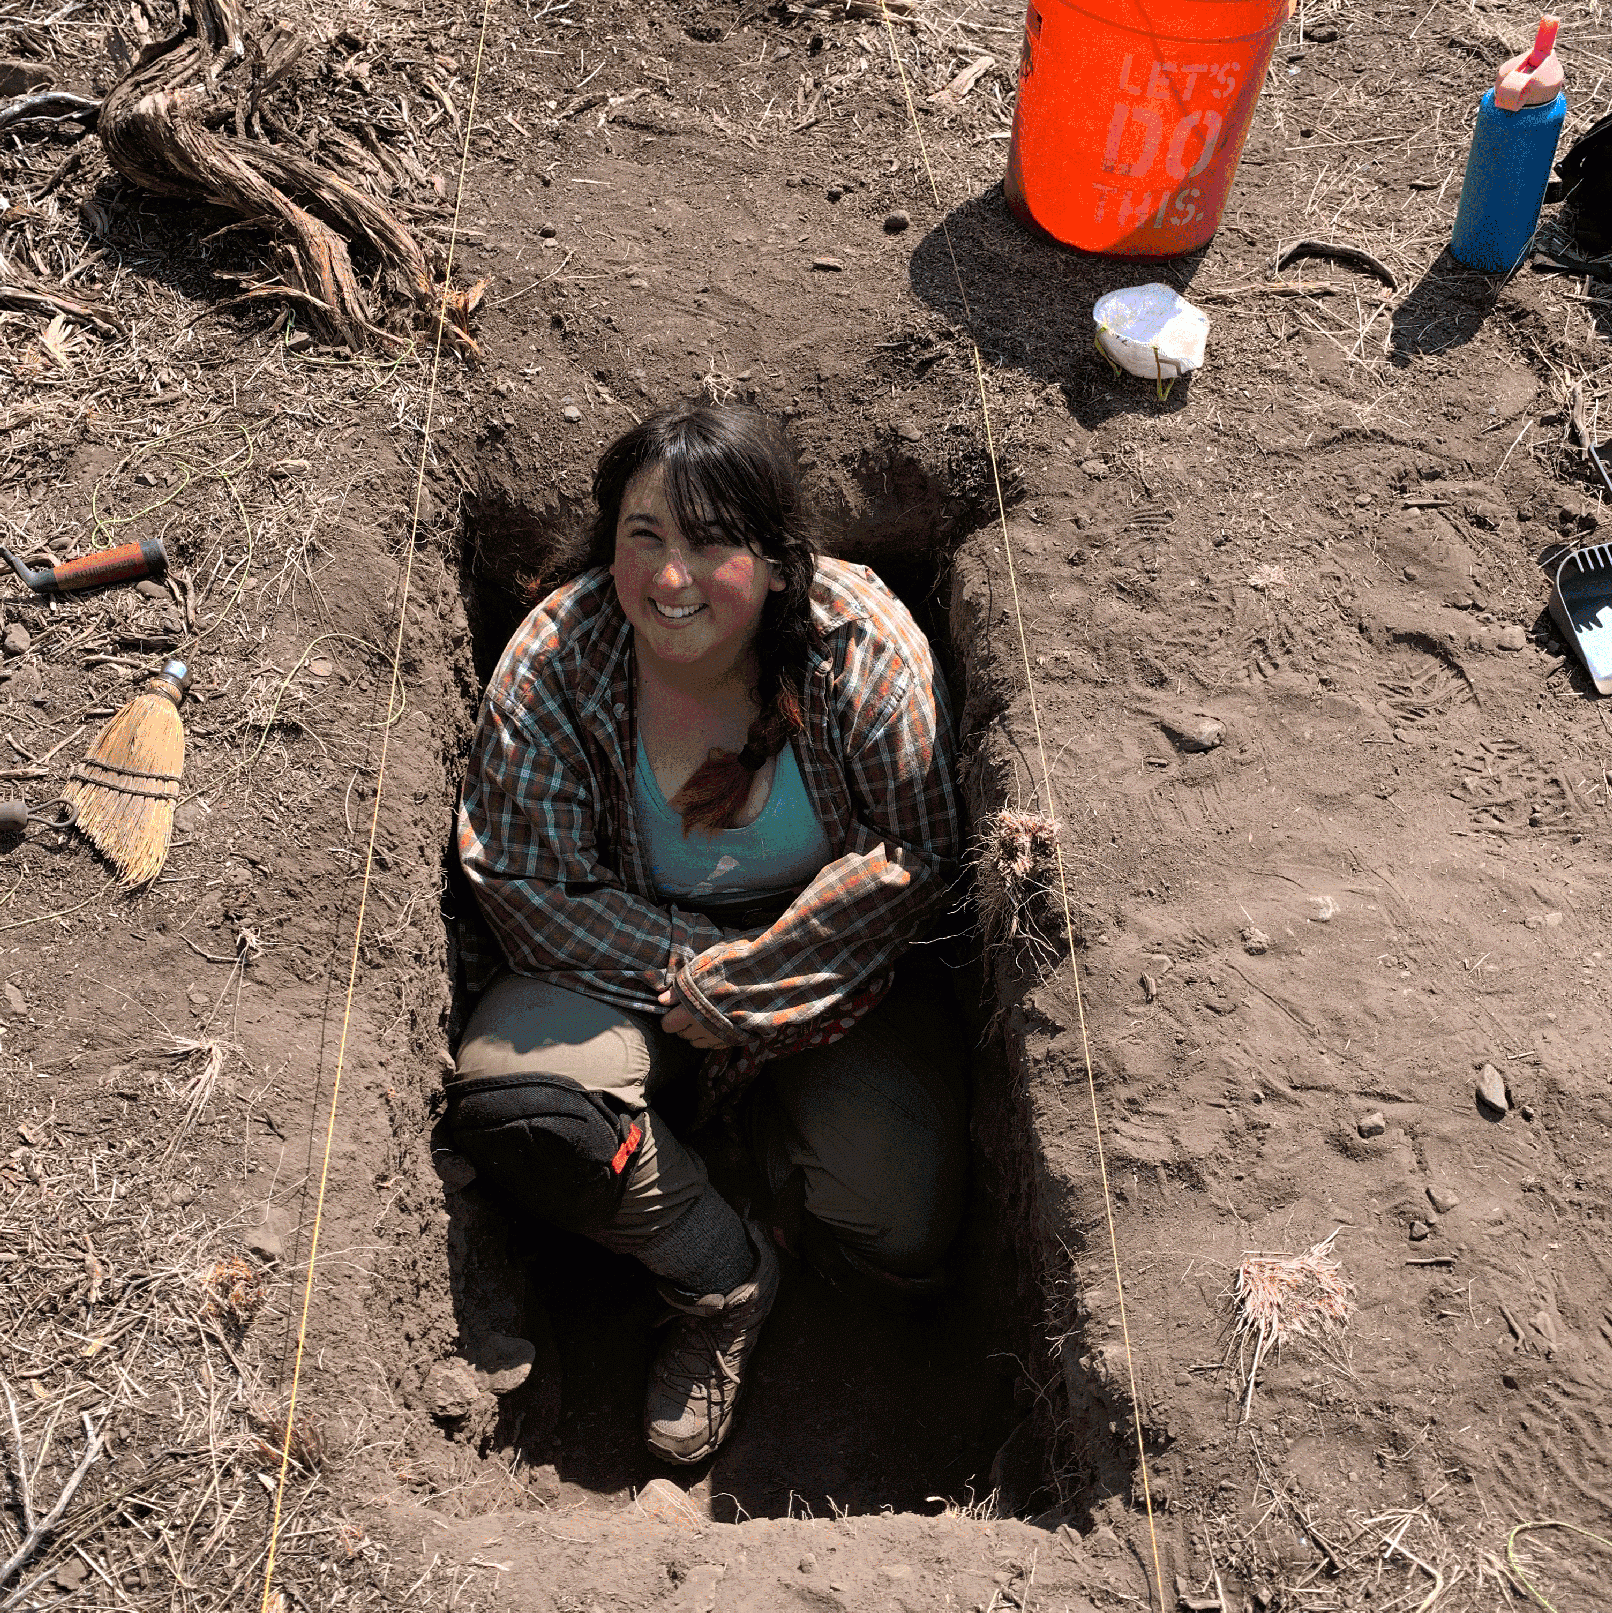 Andrea sitting in a trench at an archaeological site